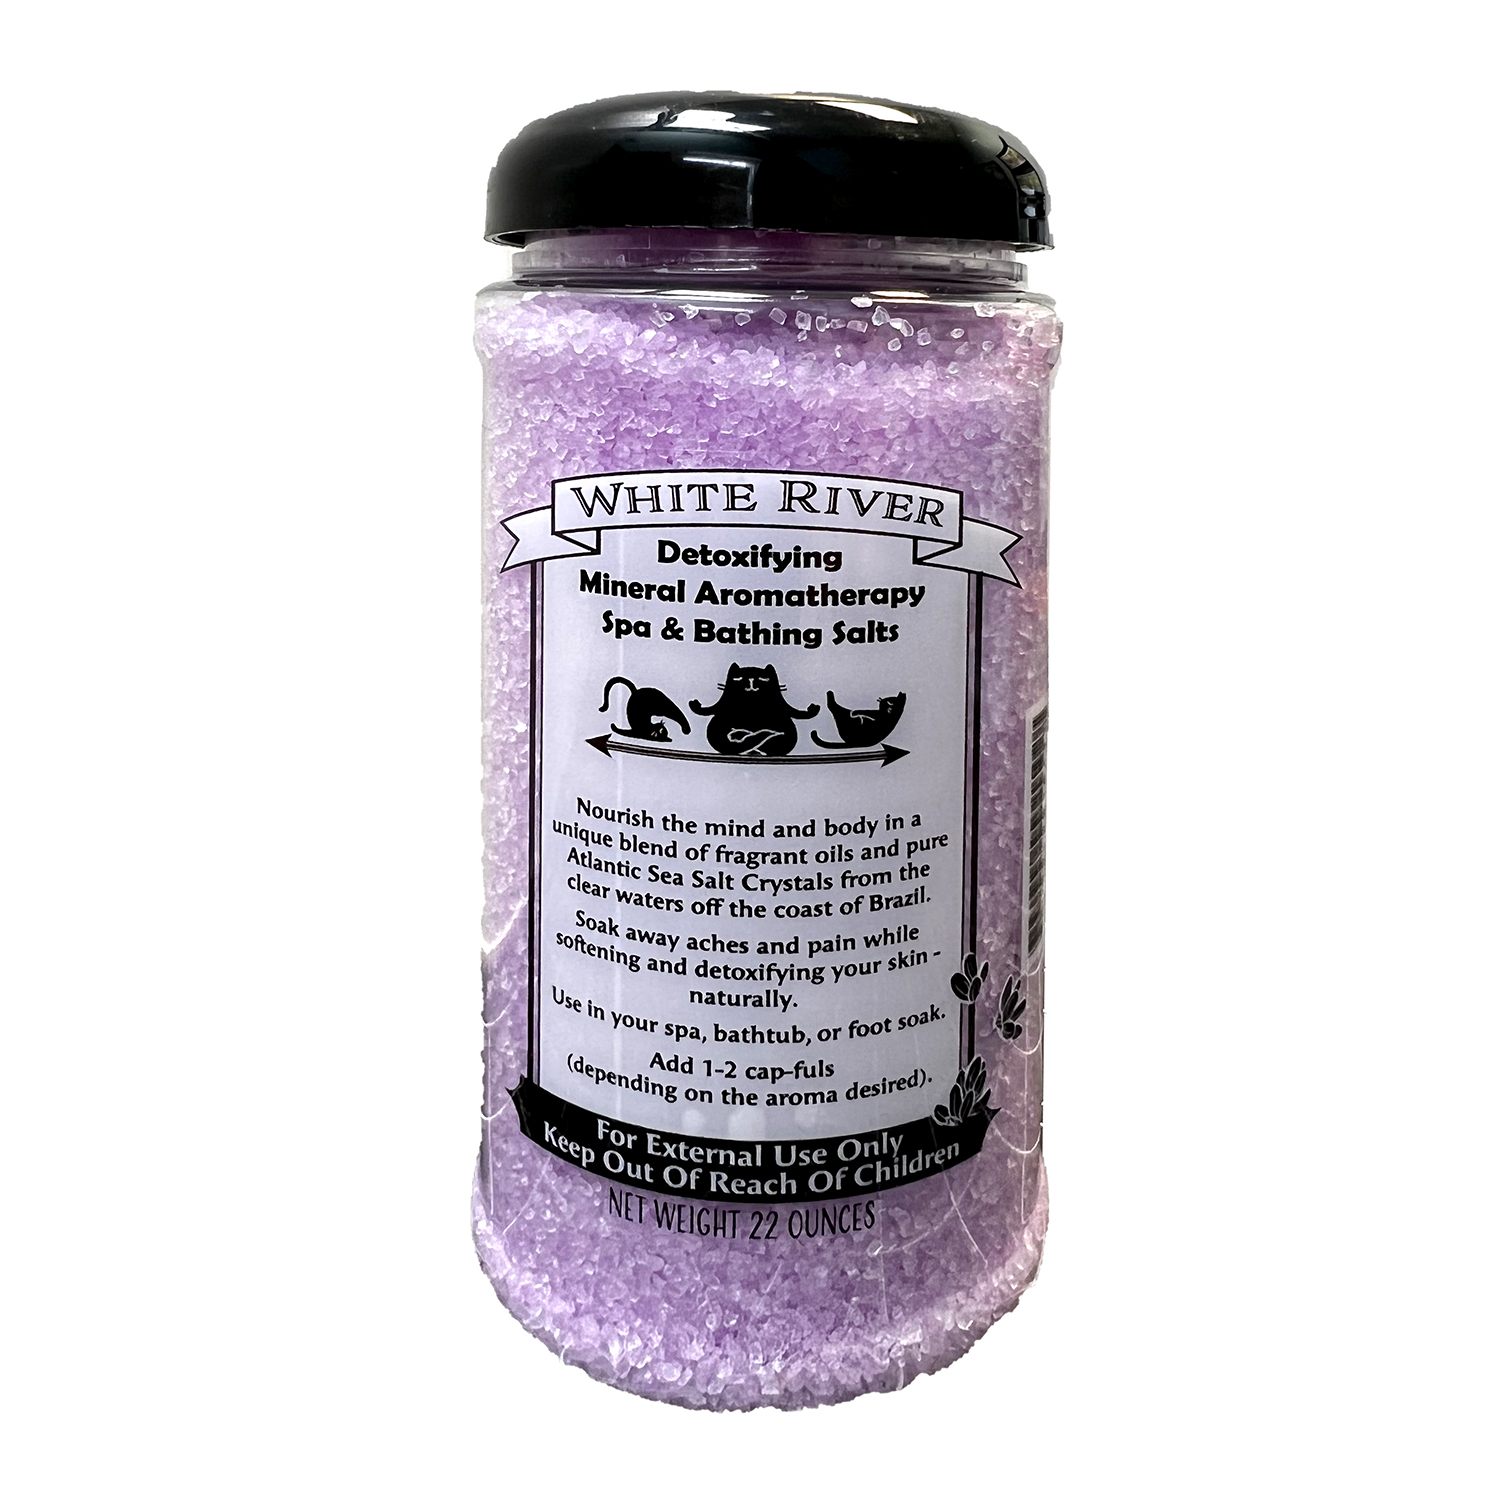 RELAX-LAVENDER SPA SCENTS 22OZ